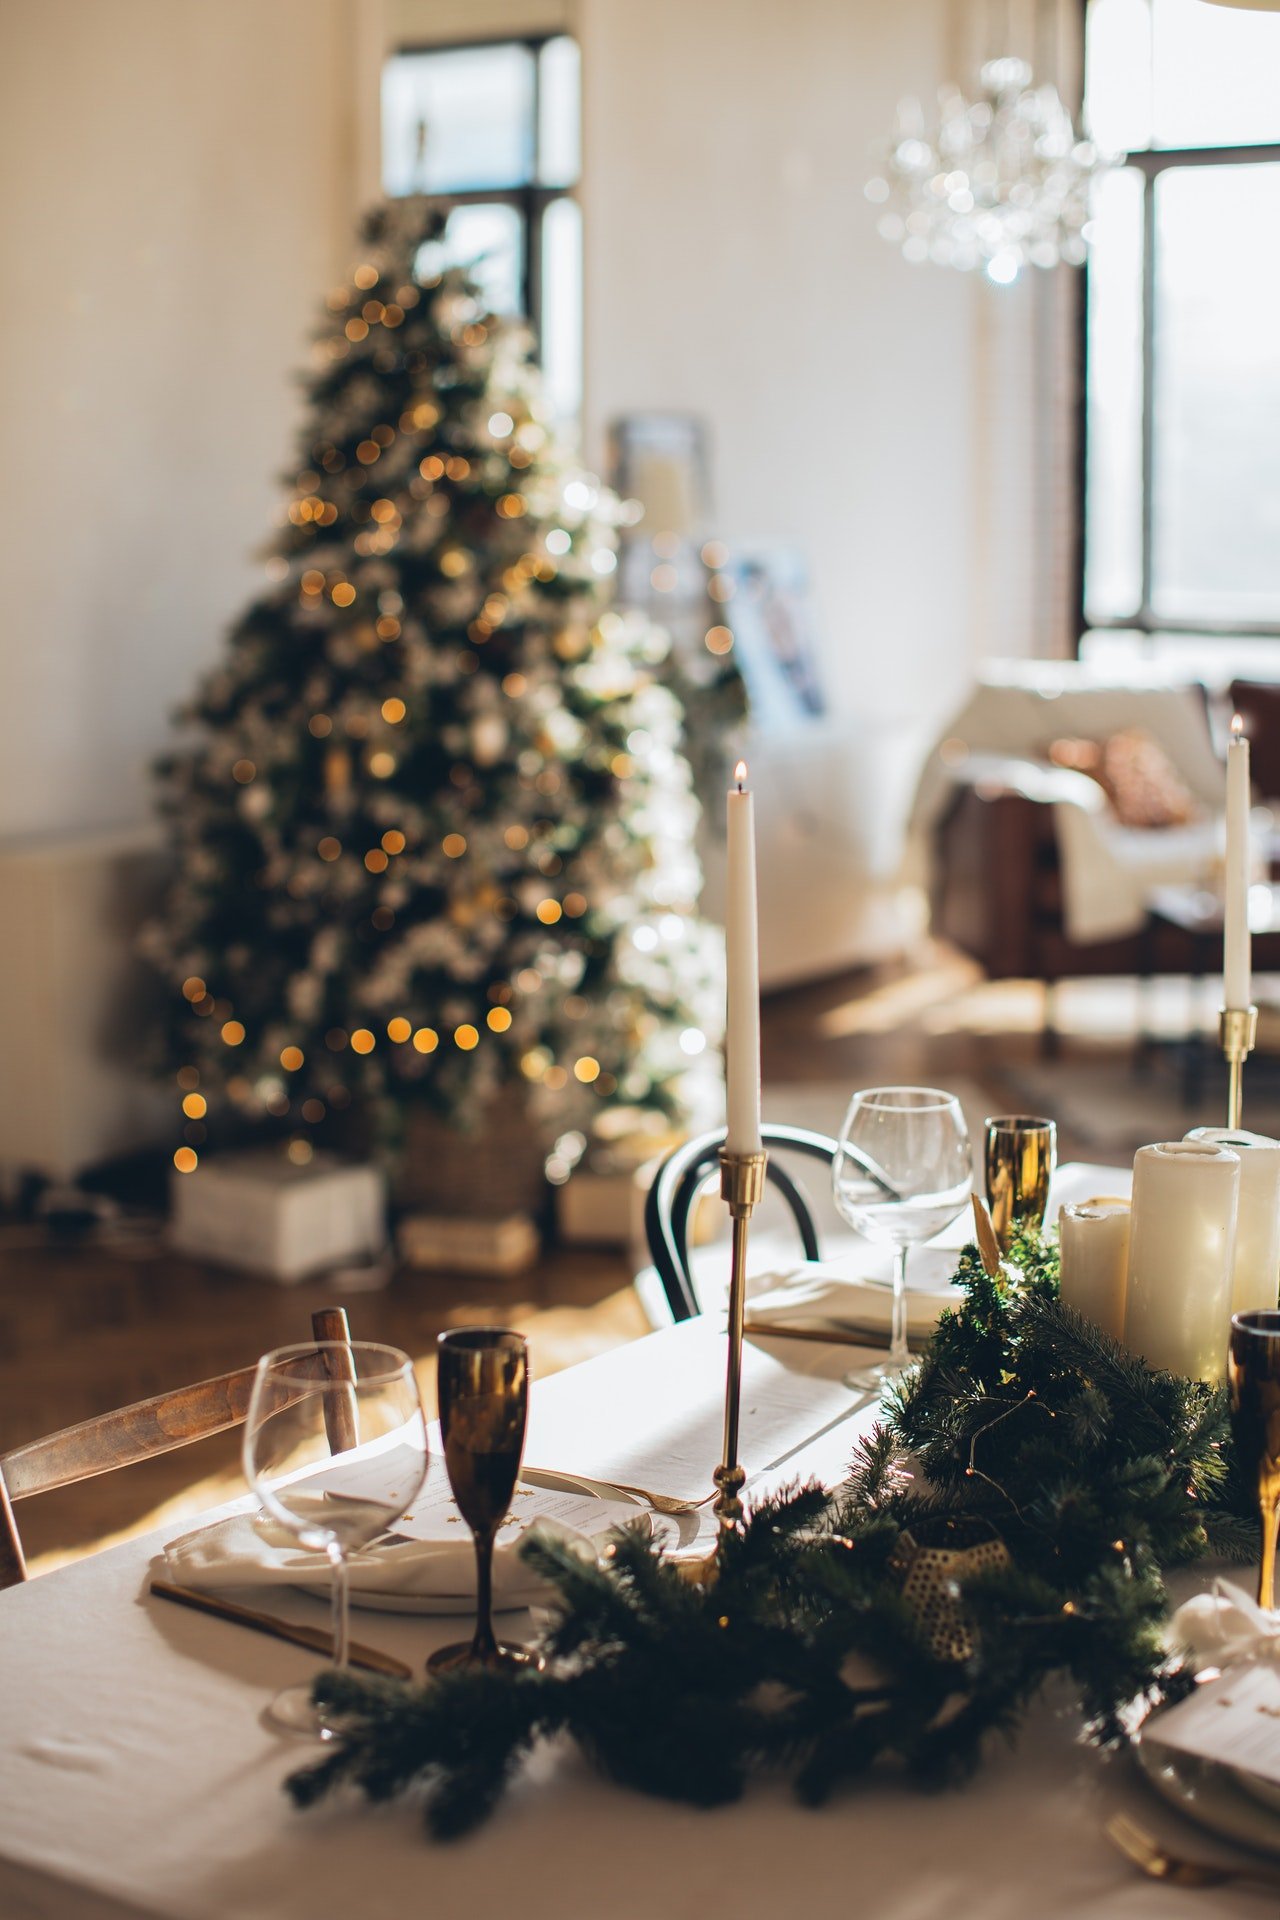 They enjoyed Christmas, and Victoria's kids never disregarded her again. | Source: Pexels